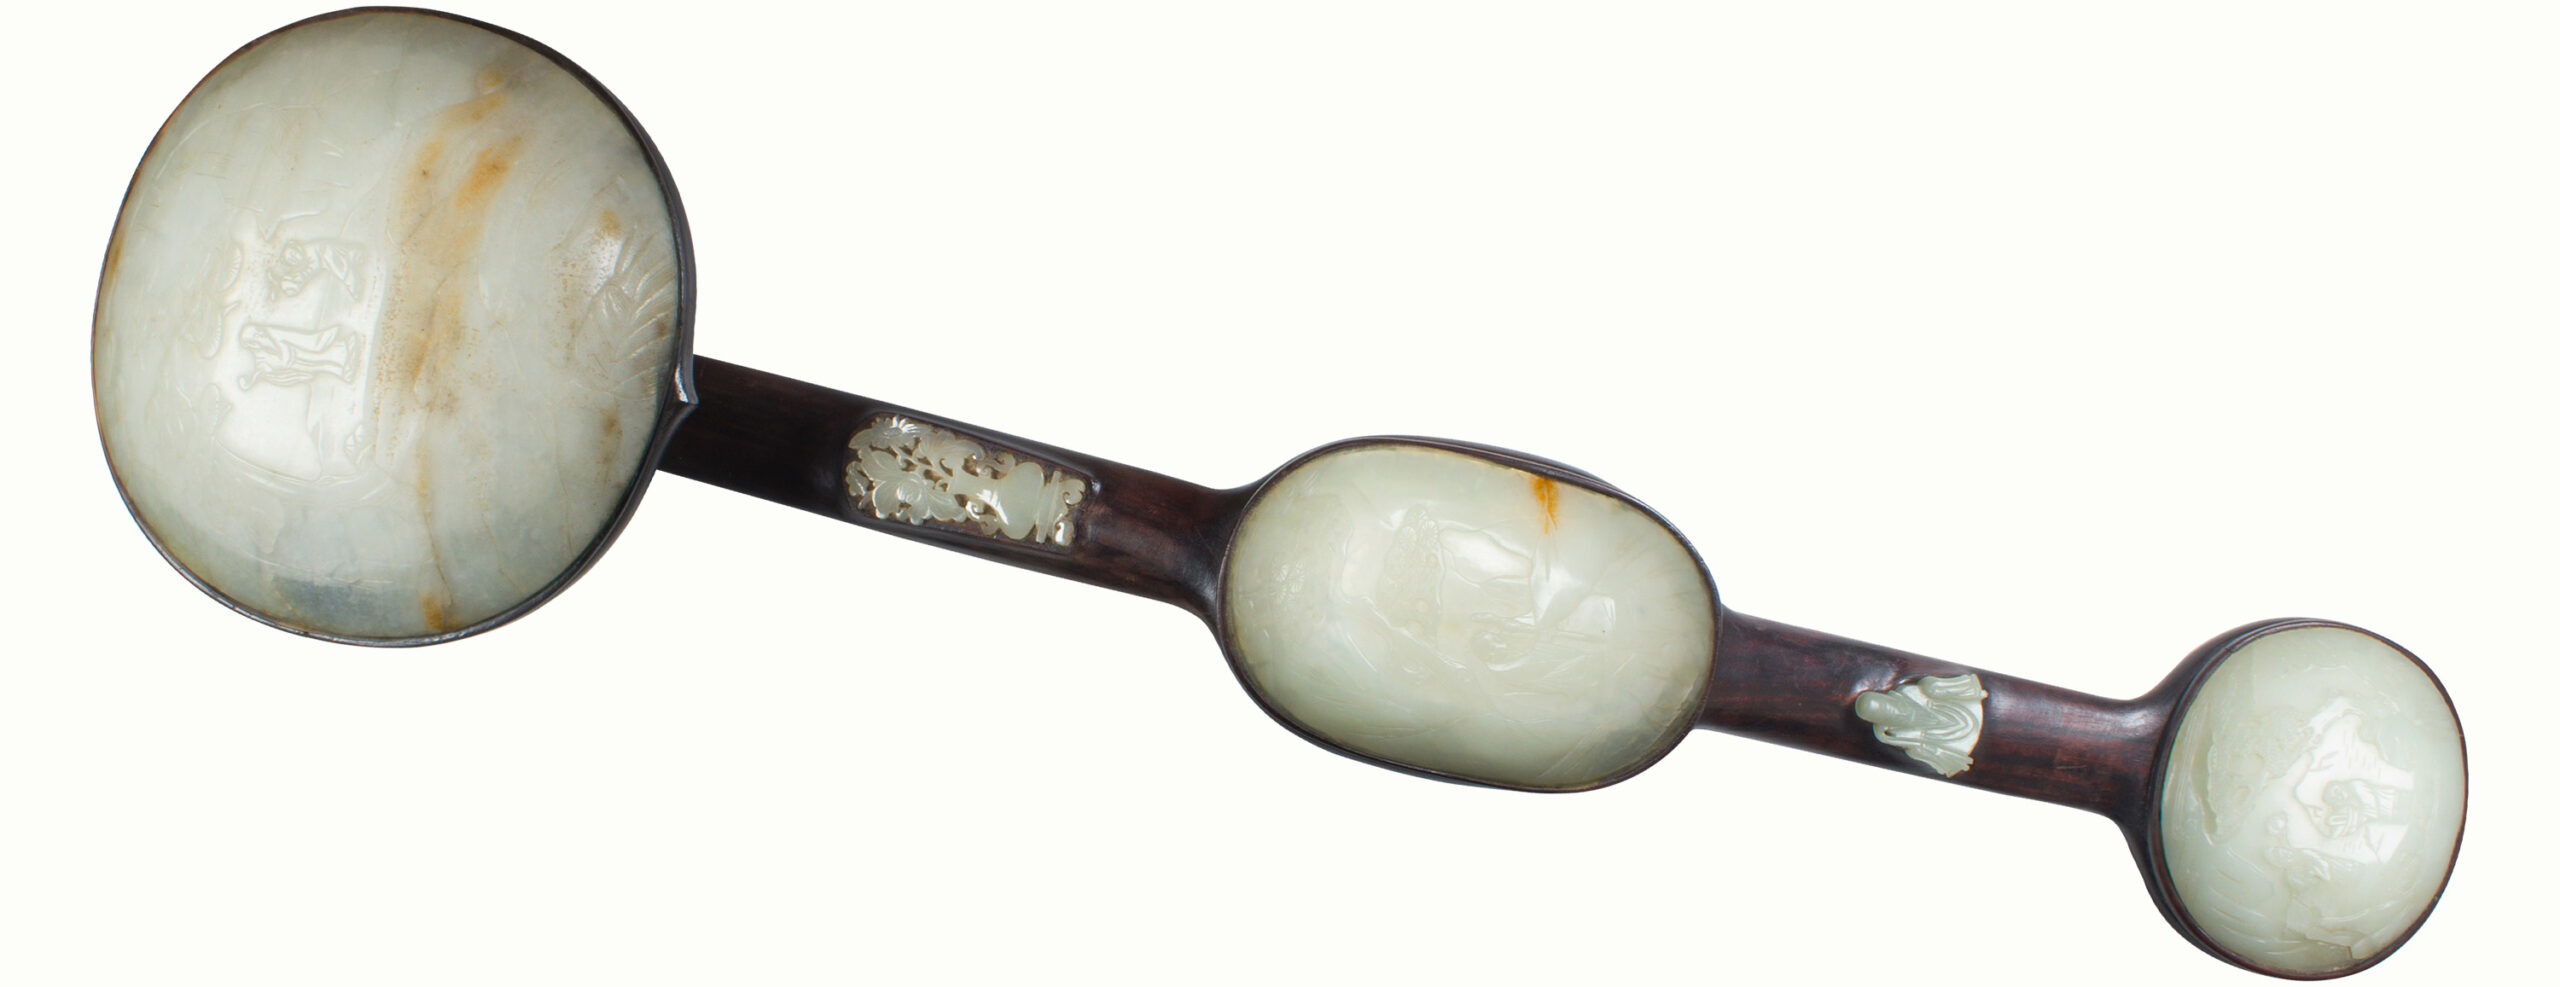 A Chinese Qing dynasty white jade ruyi scepter.